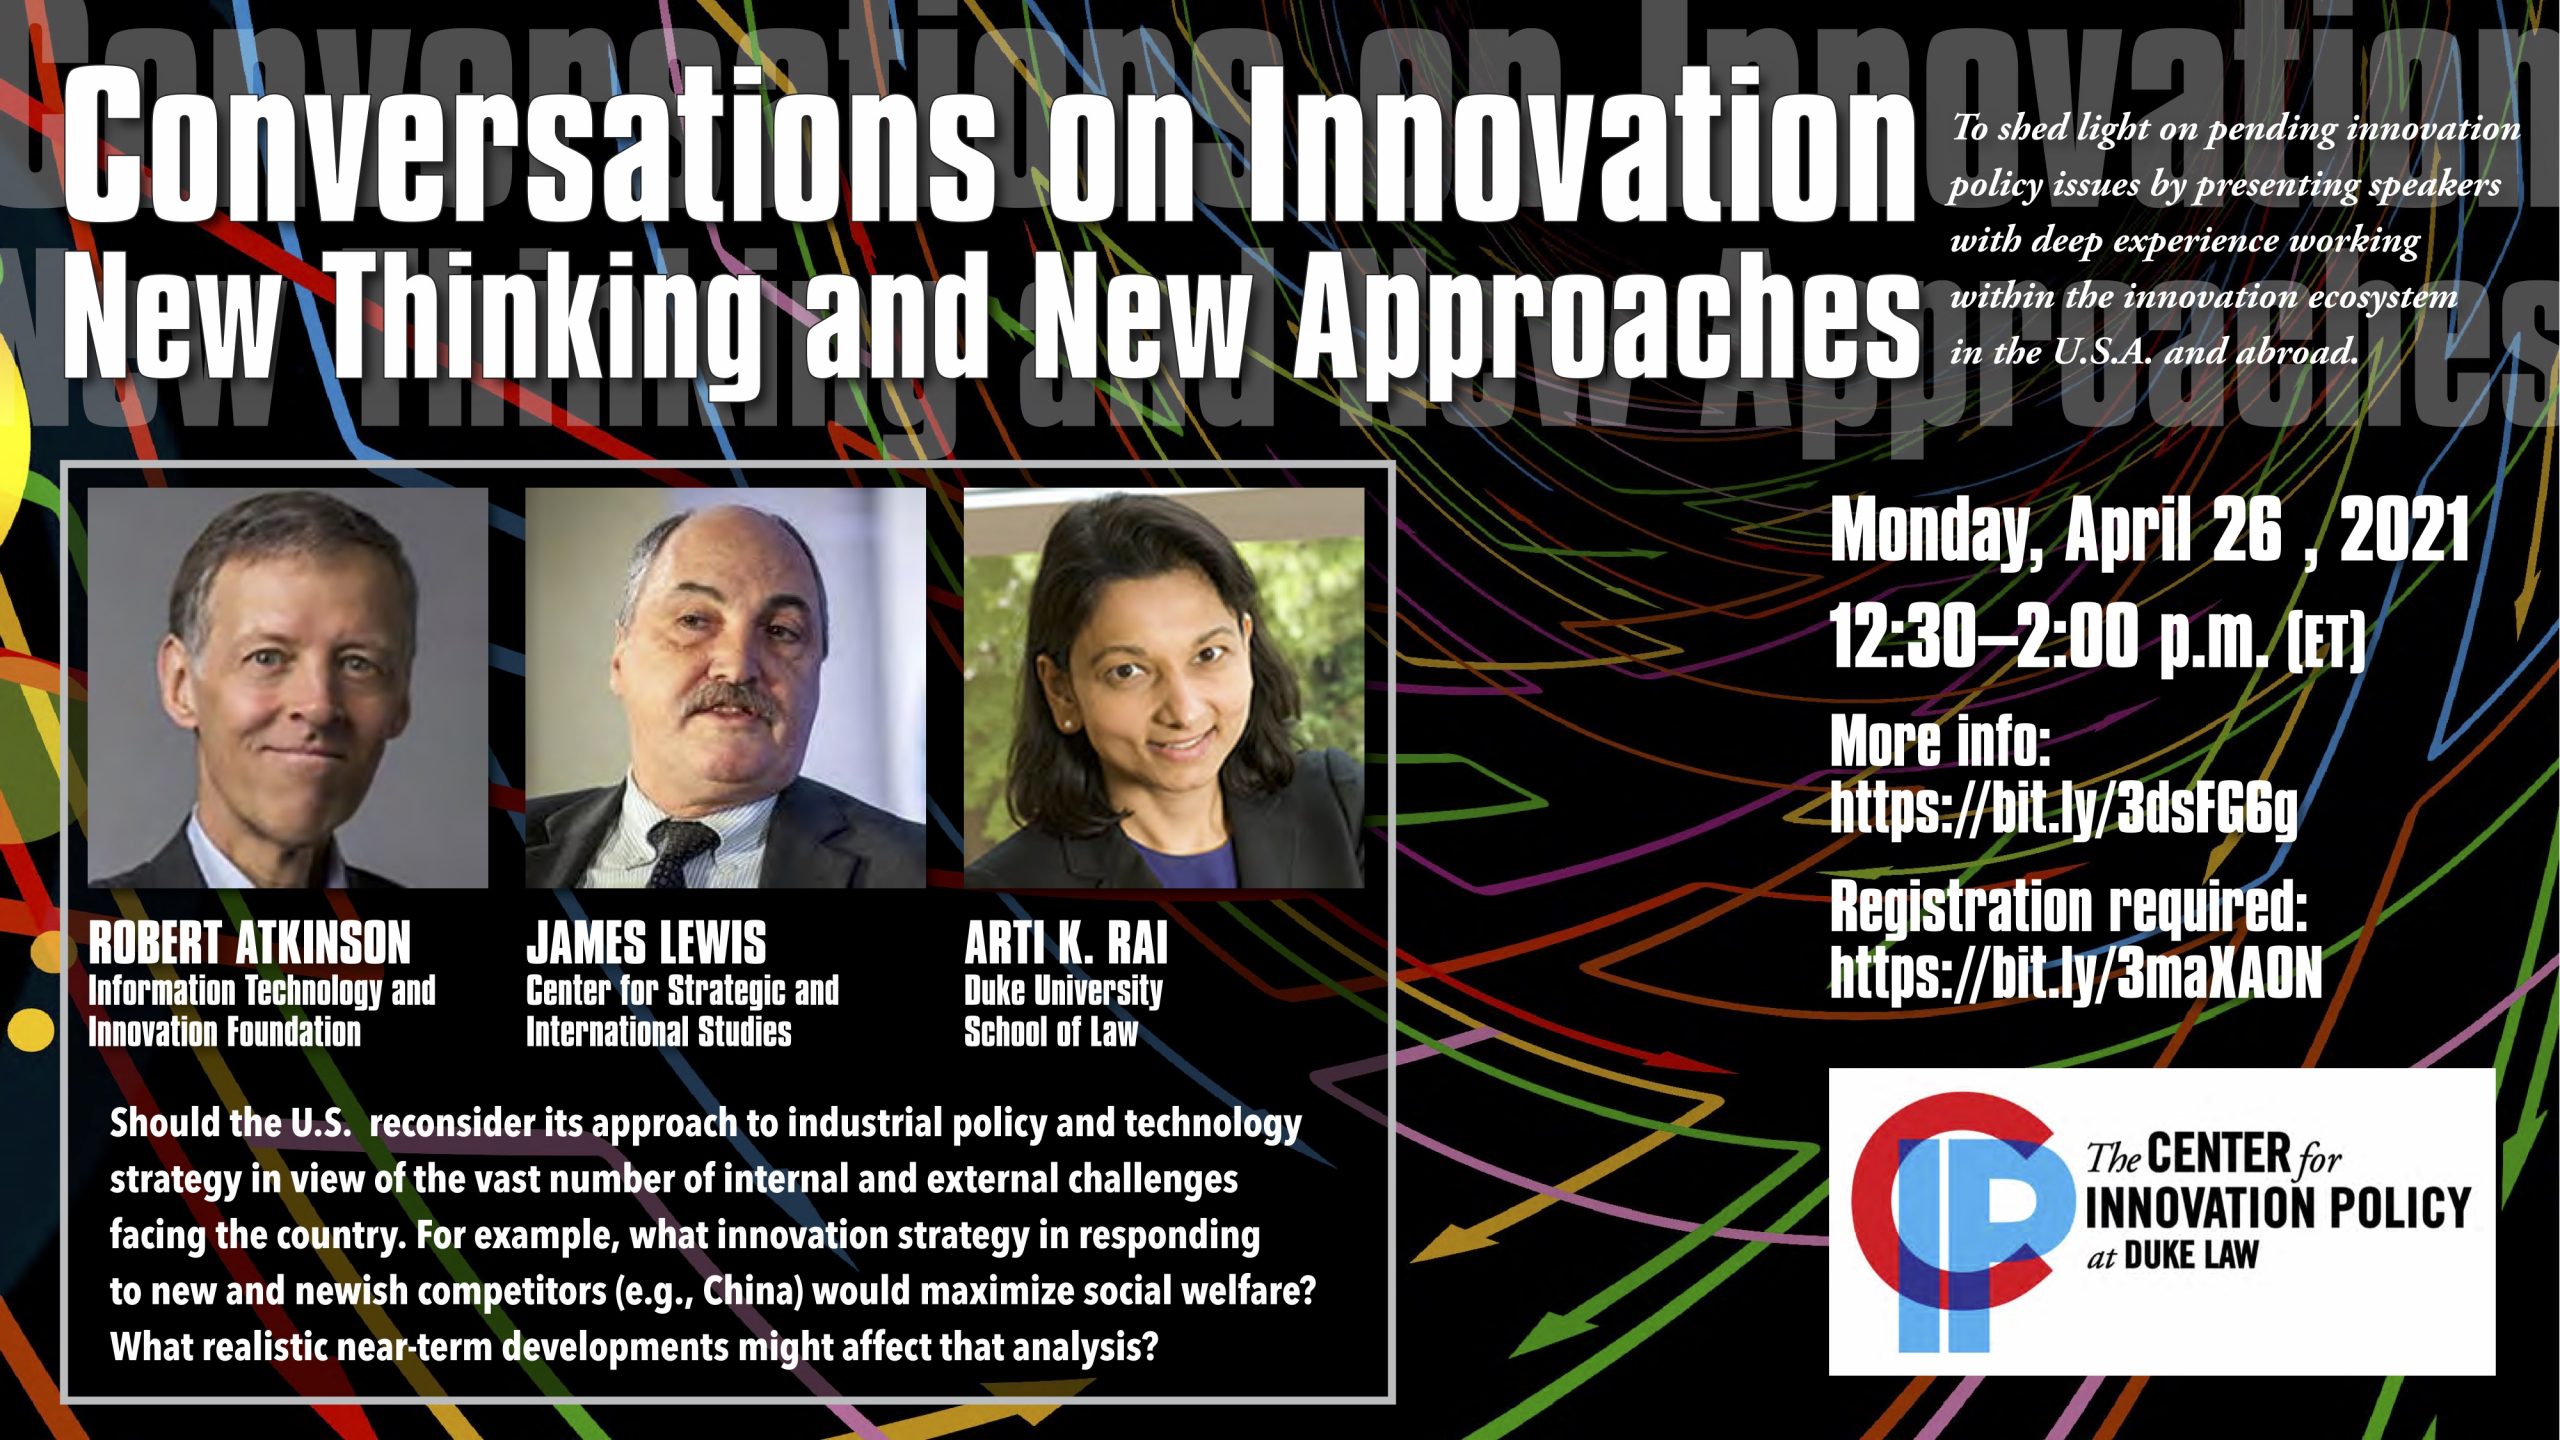 Conversations on Innovation New Thinking and Approaches: Monday, April 26th, 12:30-2:00 PM. An Event by the Center for Innovation Policy at Duke Law.